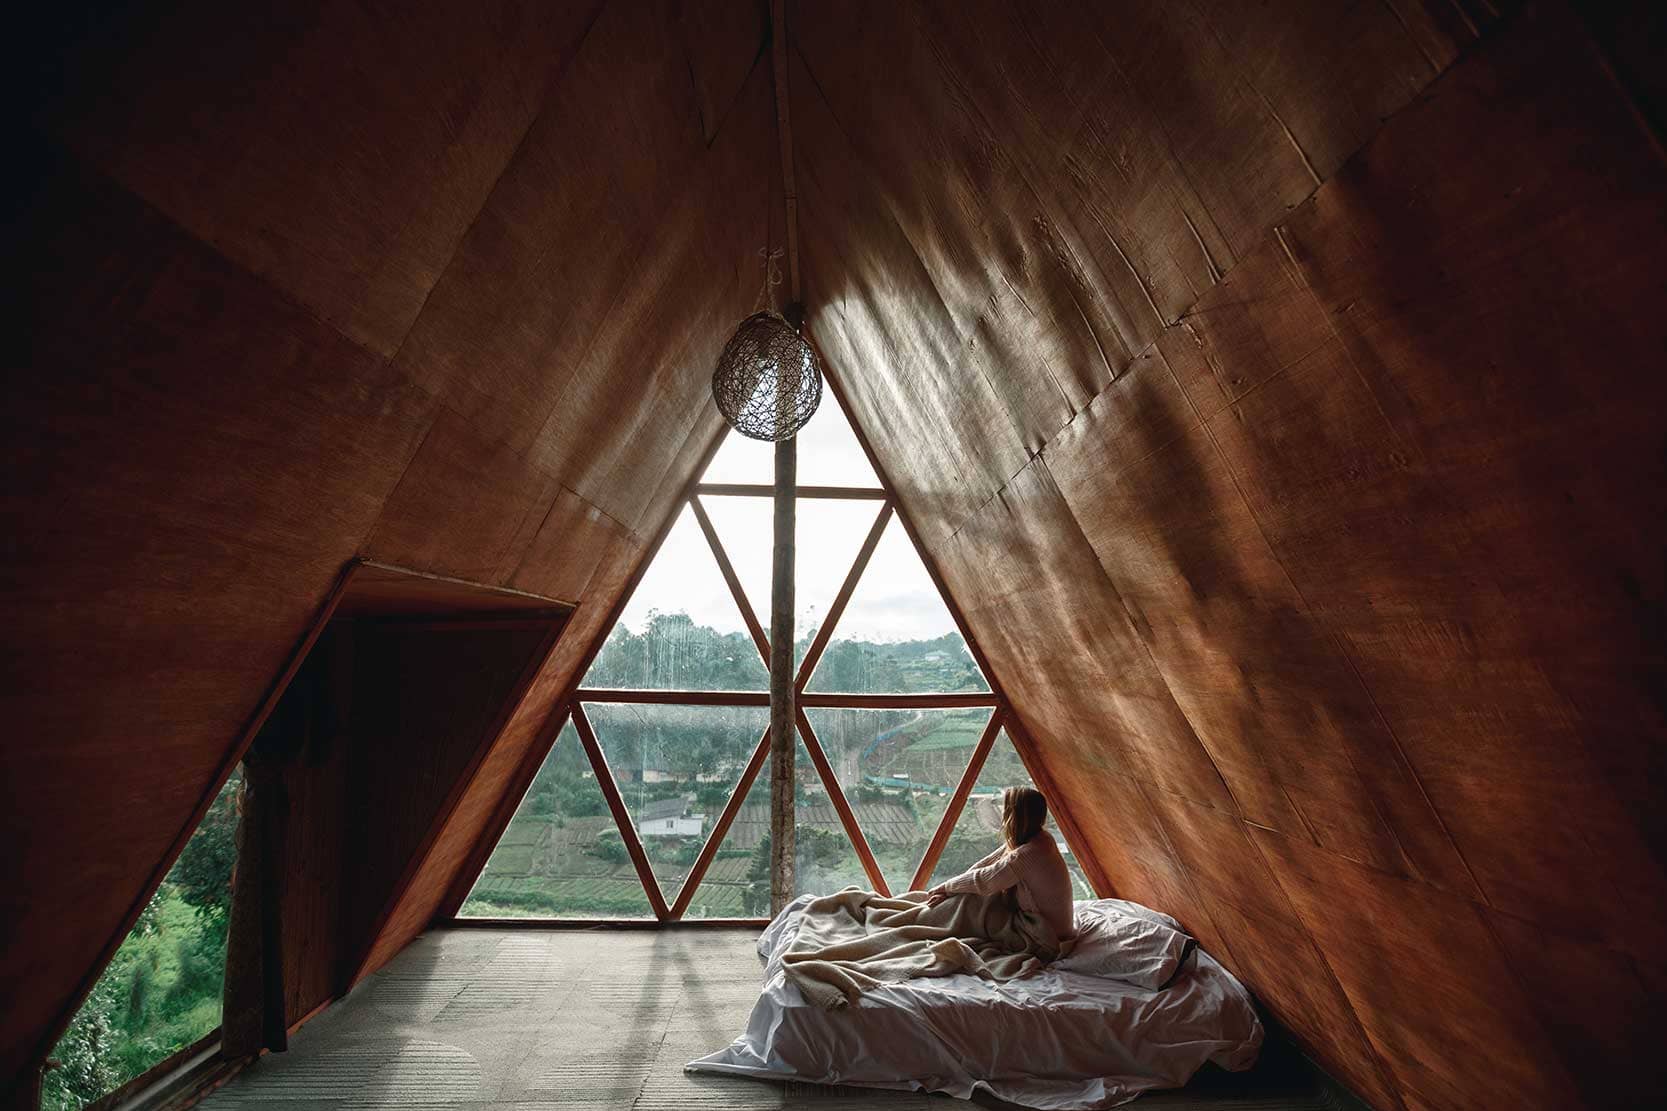 Waking up in the Wooden Cabin